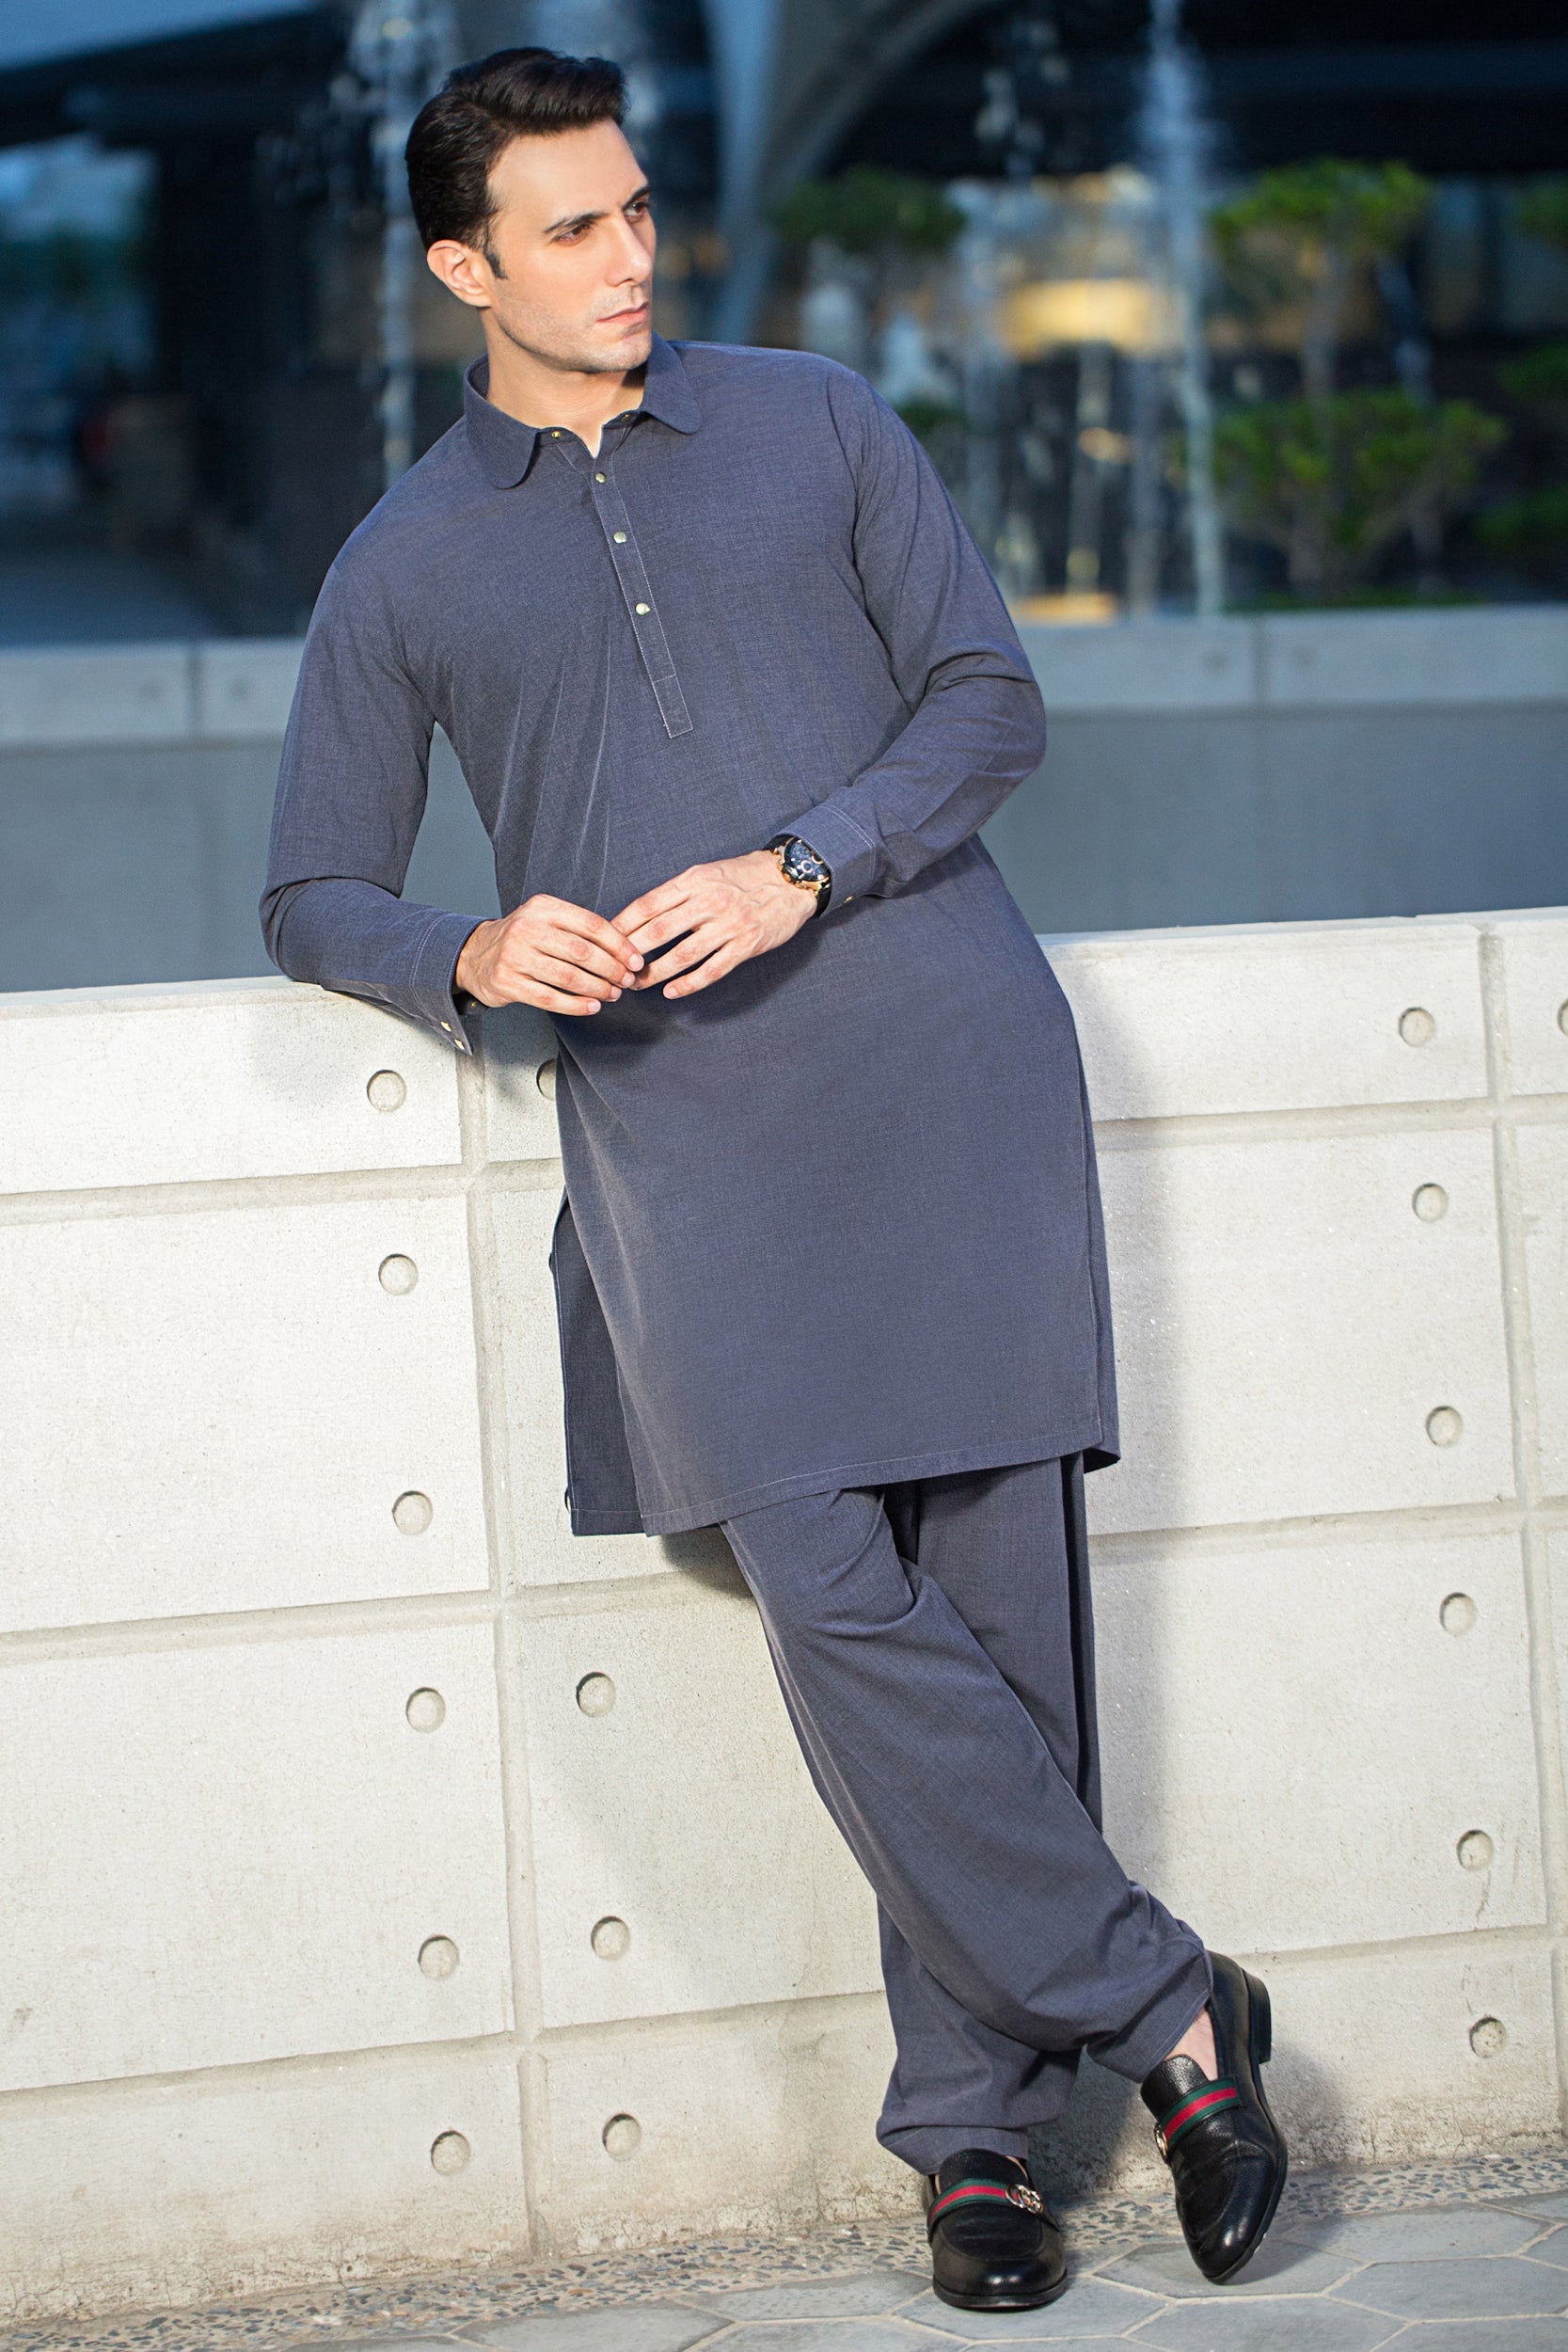 All Season Collection Stitched Shalwar Kameez - Charcoal Twotone